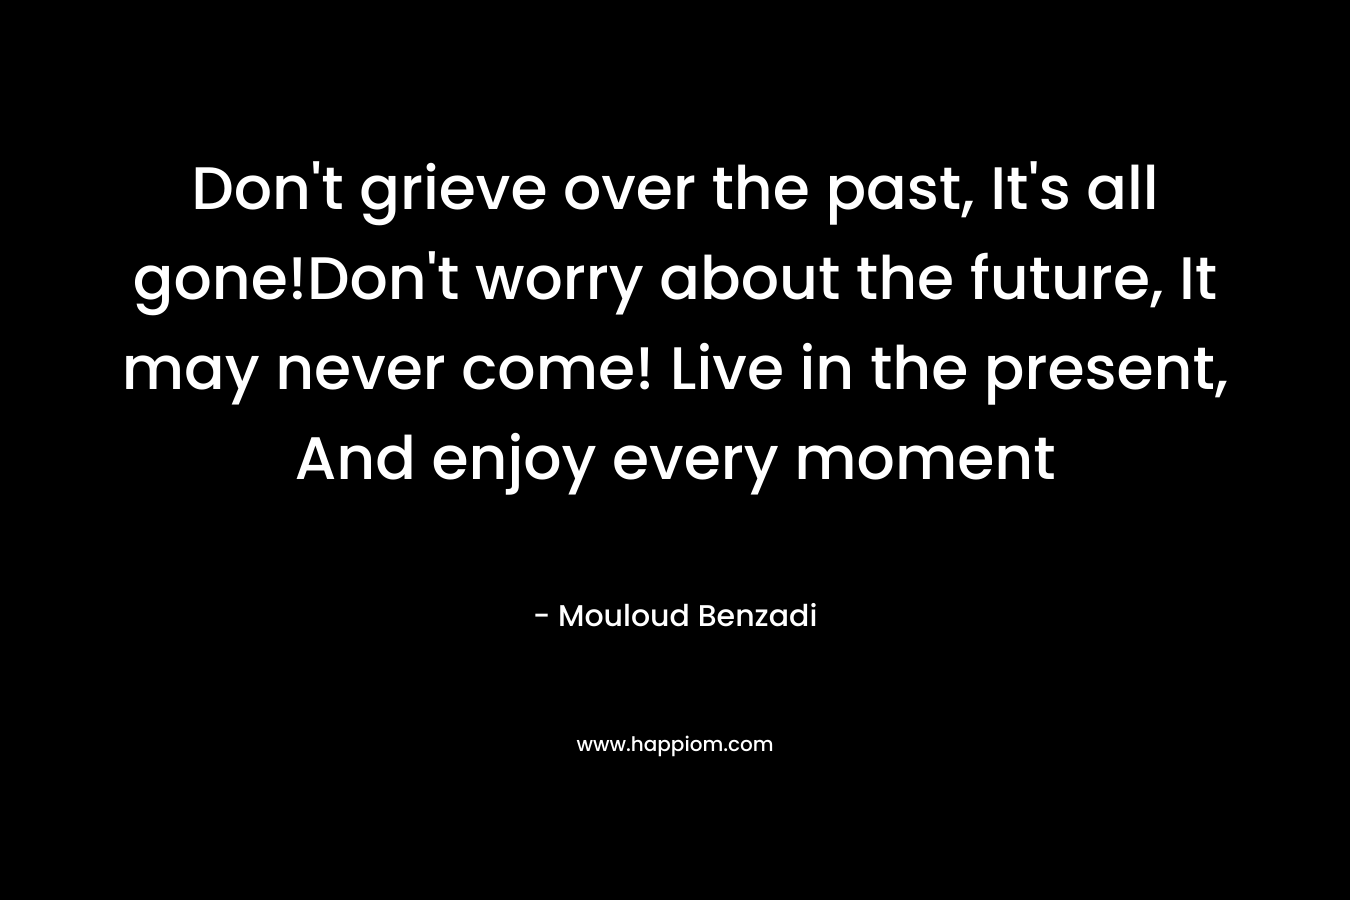 Don't grieve over the past, It's all gone!Don't worry about the future, It may never come! Live in the present, And enjoy every moment